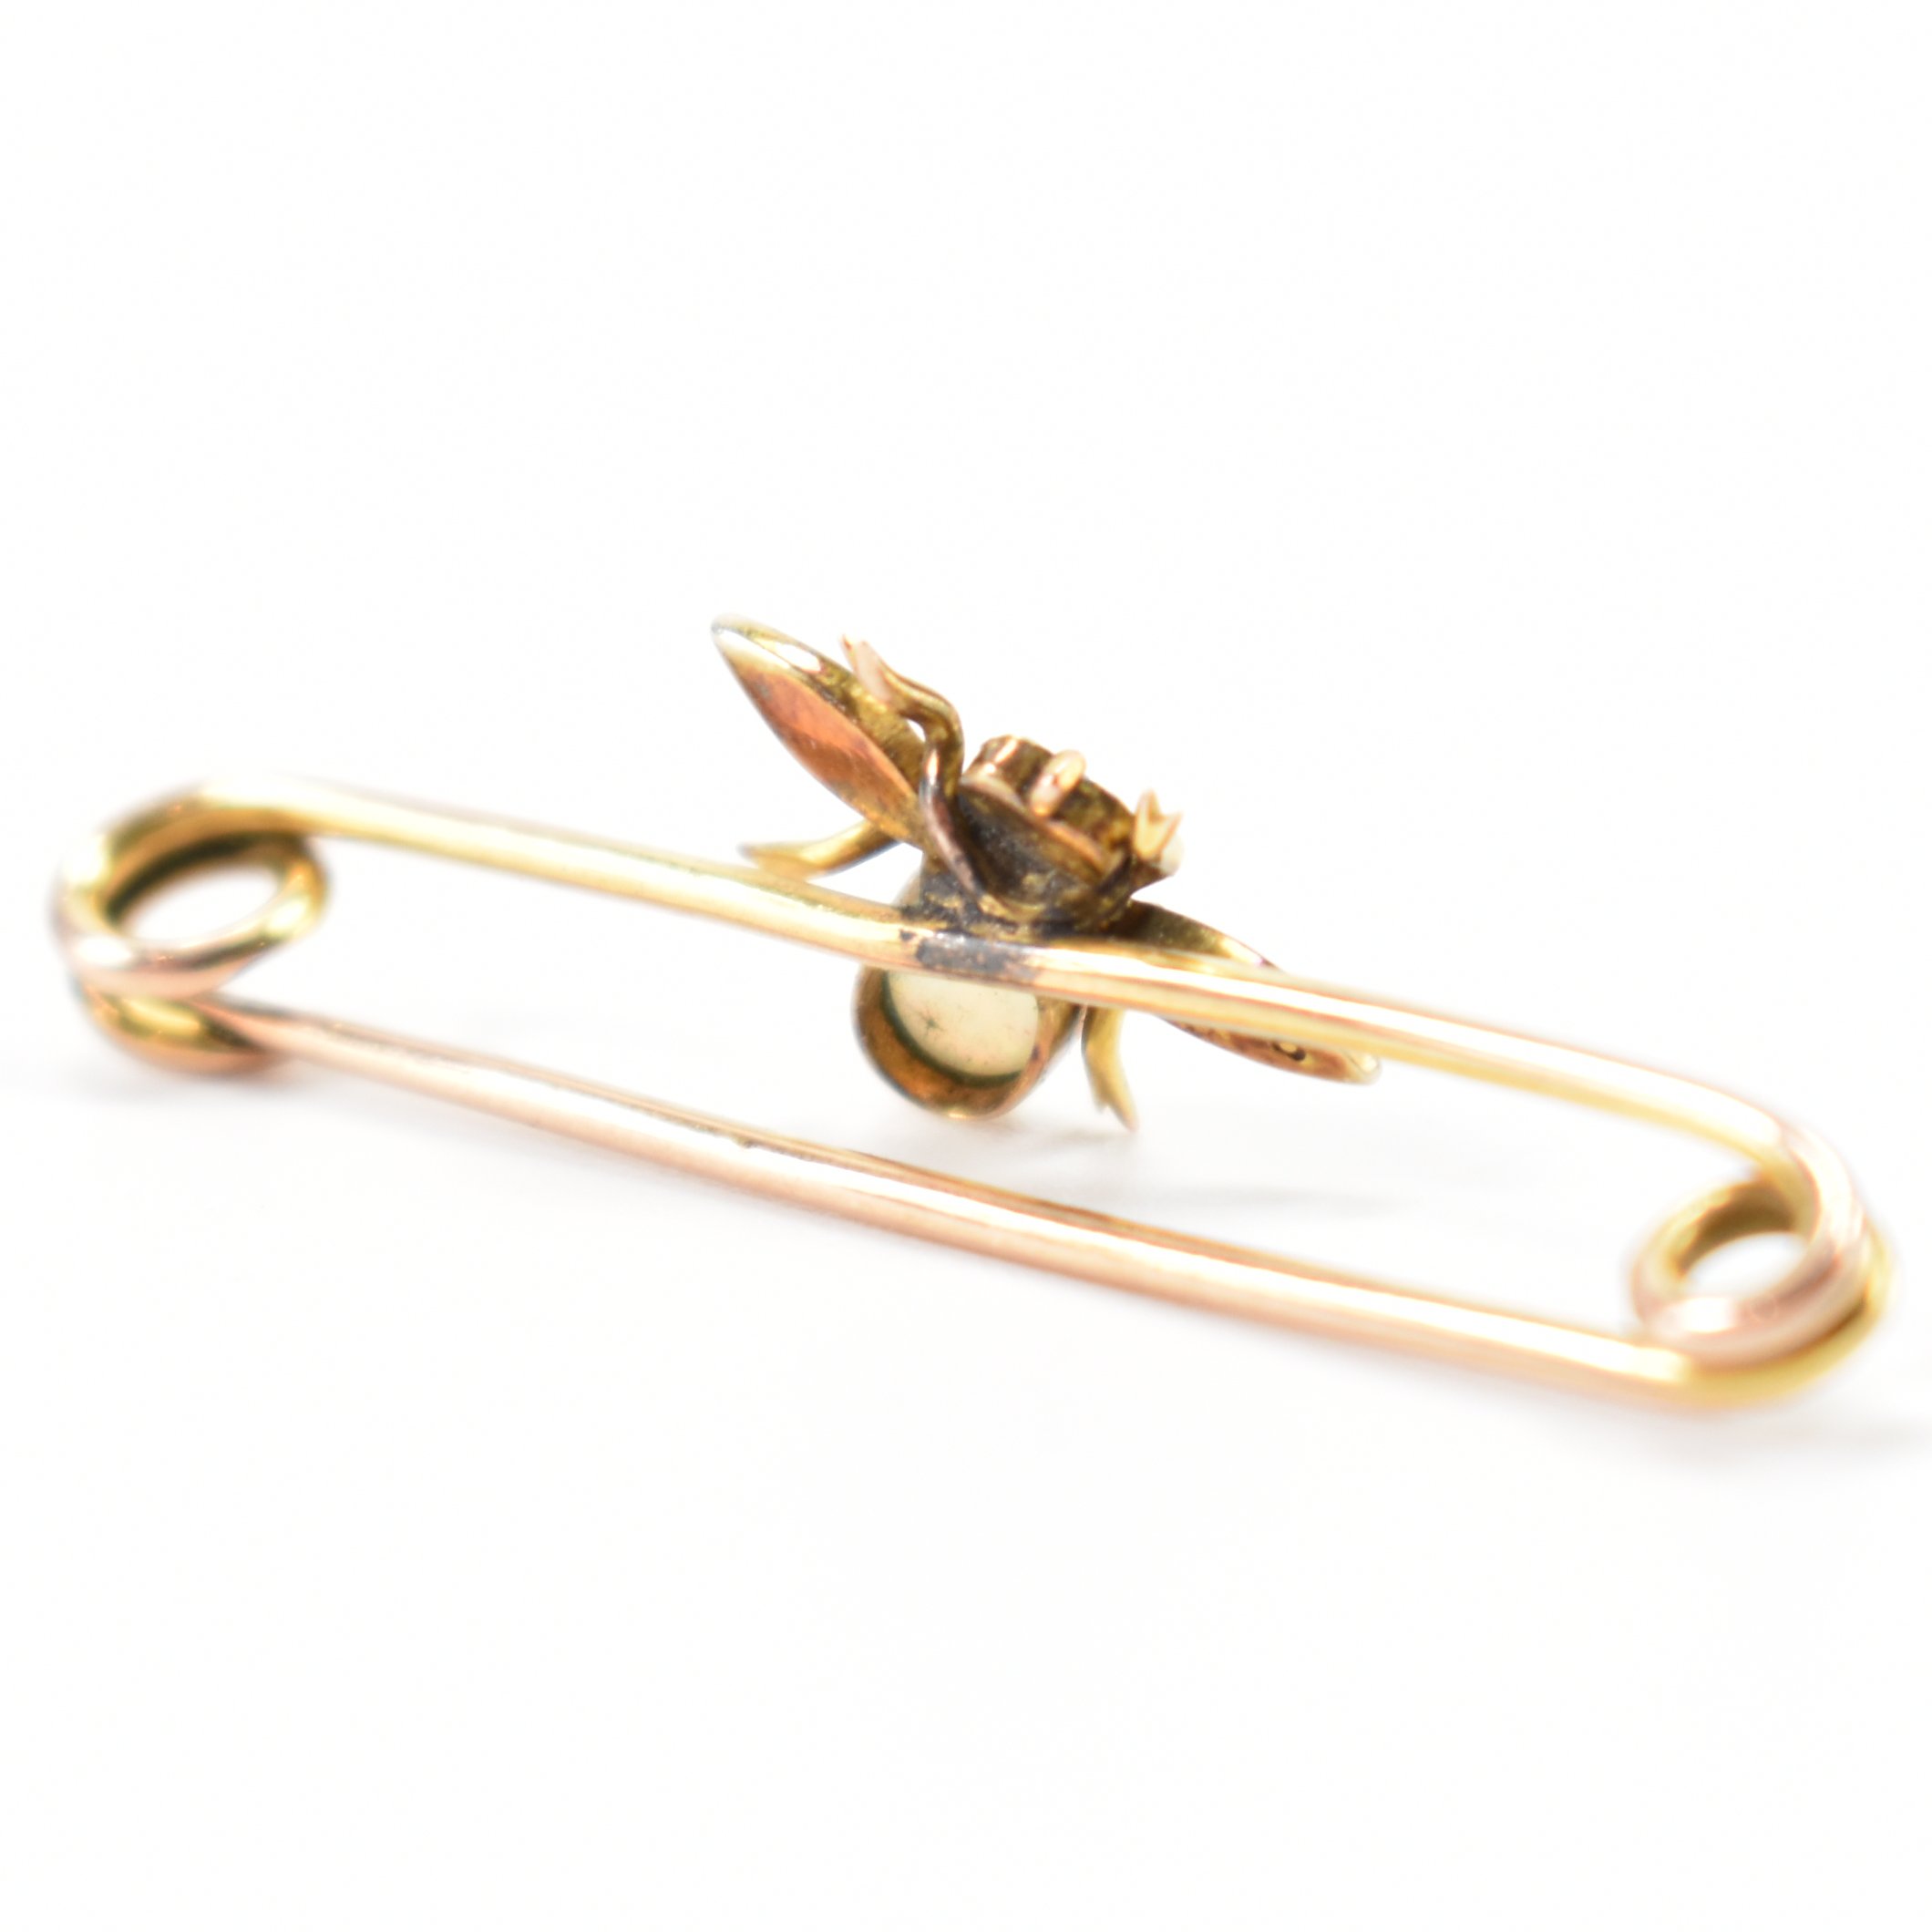 VICTORIAN 9CT GOLD OPAL & SEED PEARL BUG BROOCH - Image 4 of 9